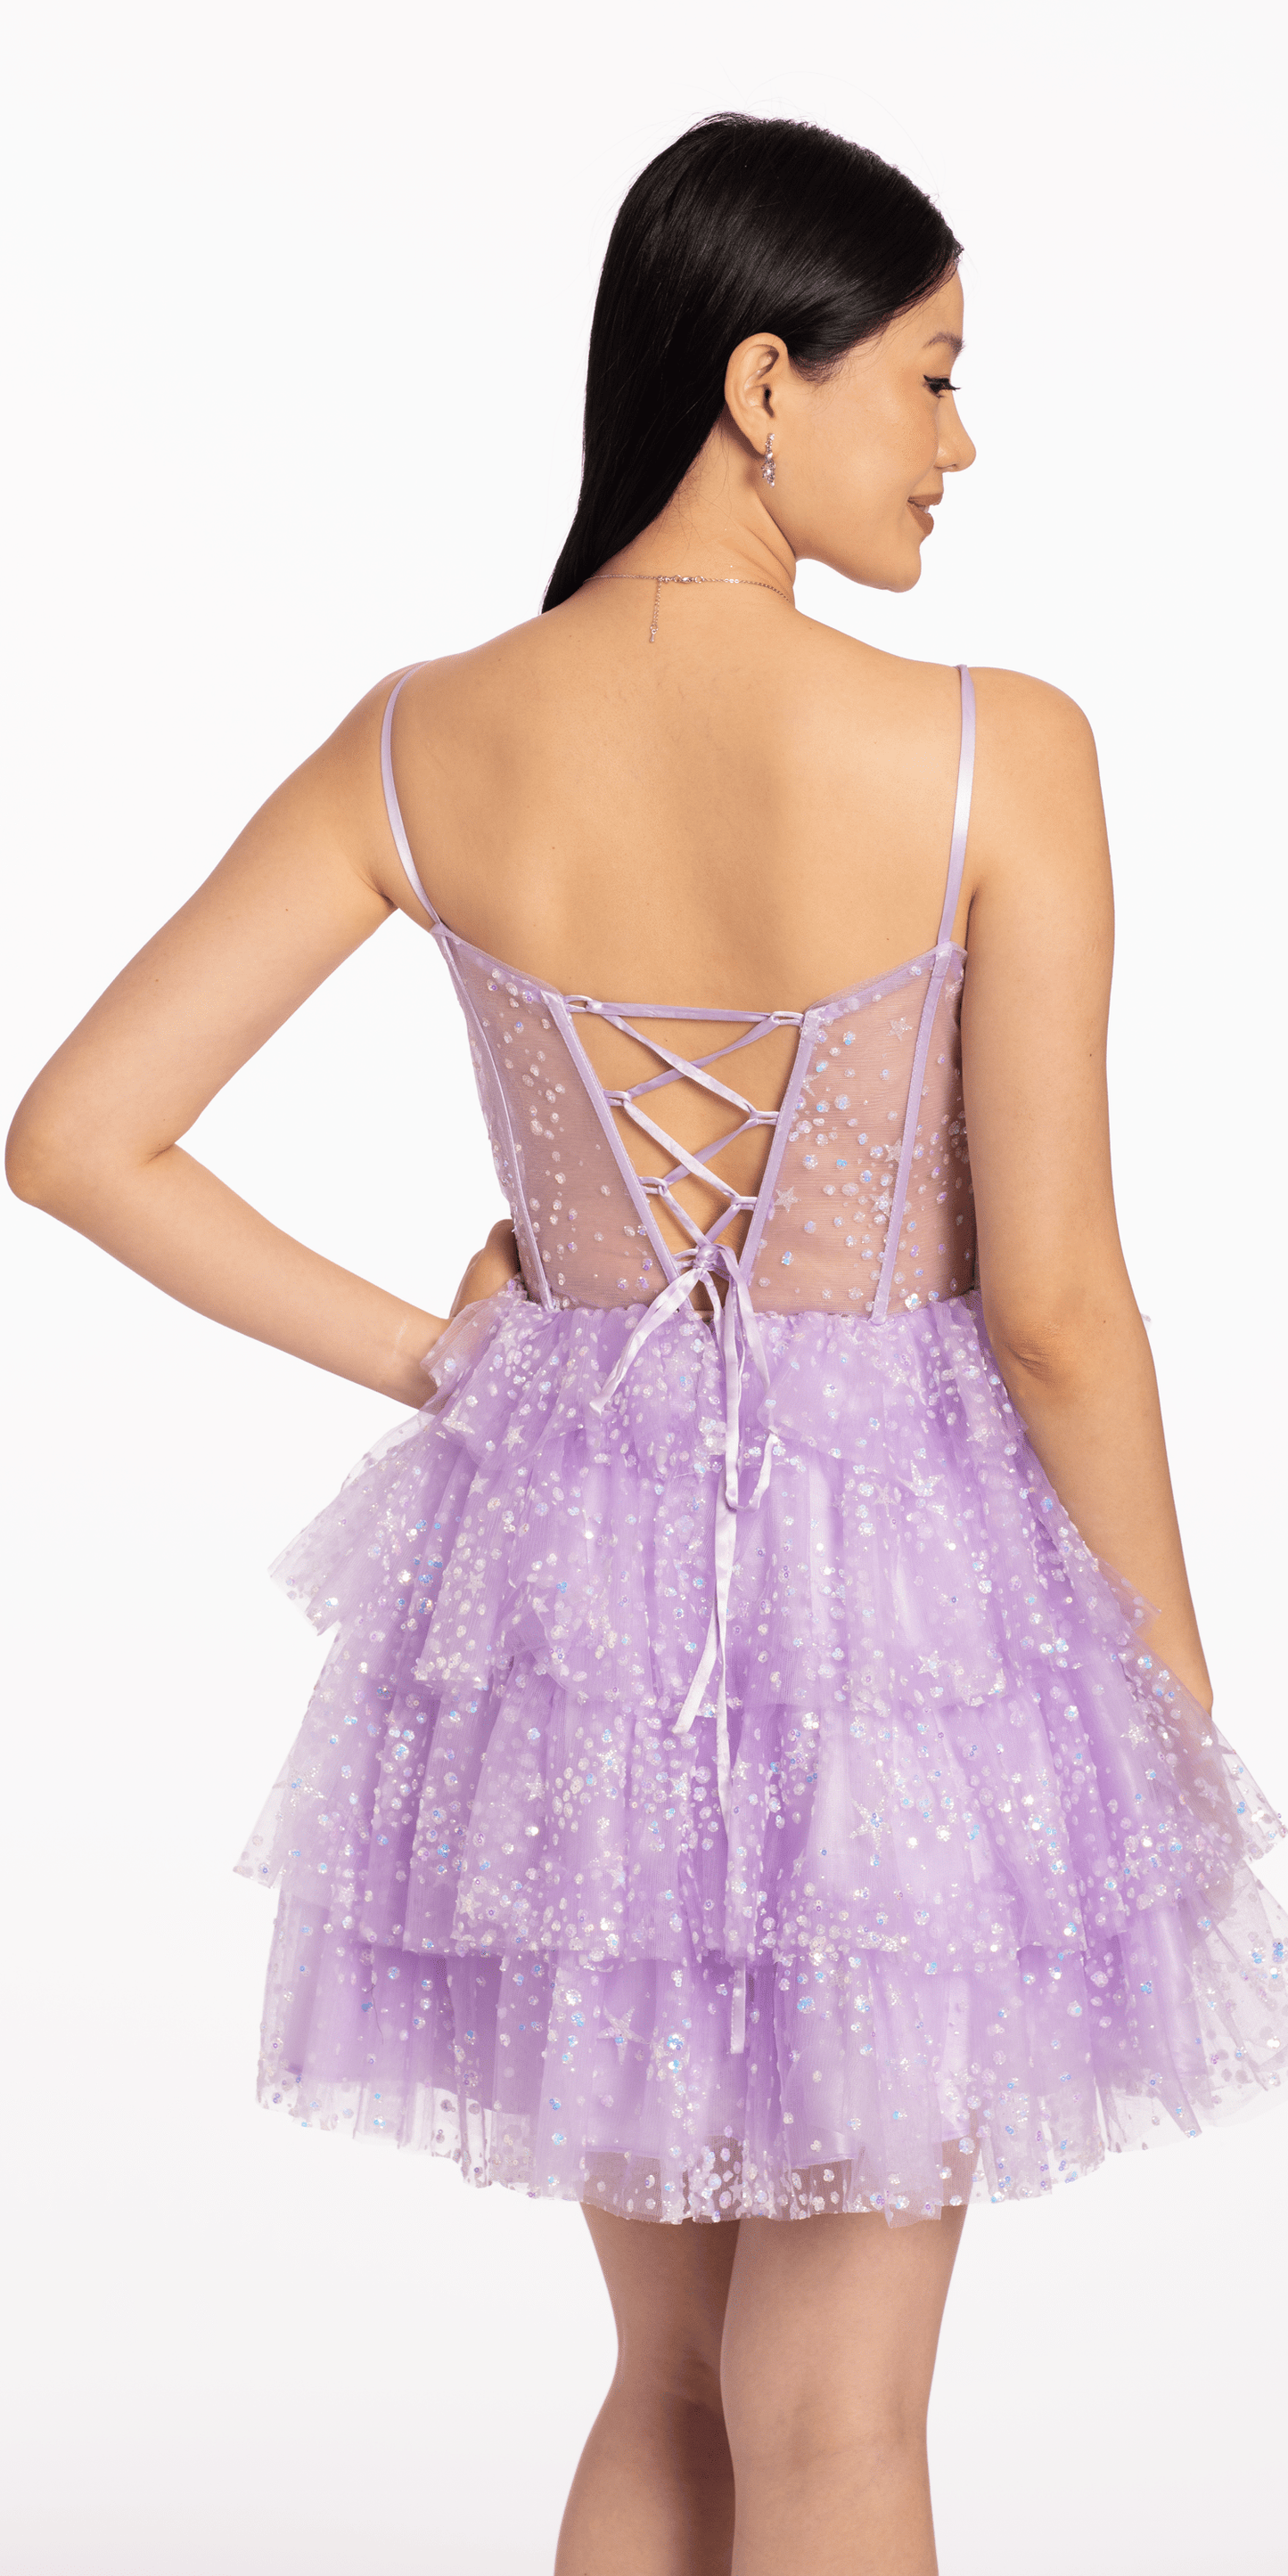 Camille La Vie Glitter Corset  Fit and Flare Lace Up Back Dress